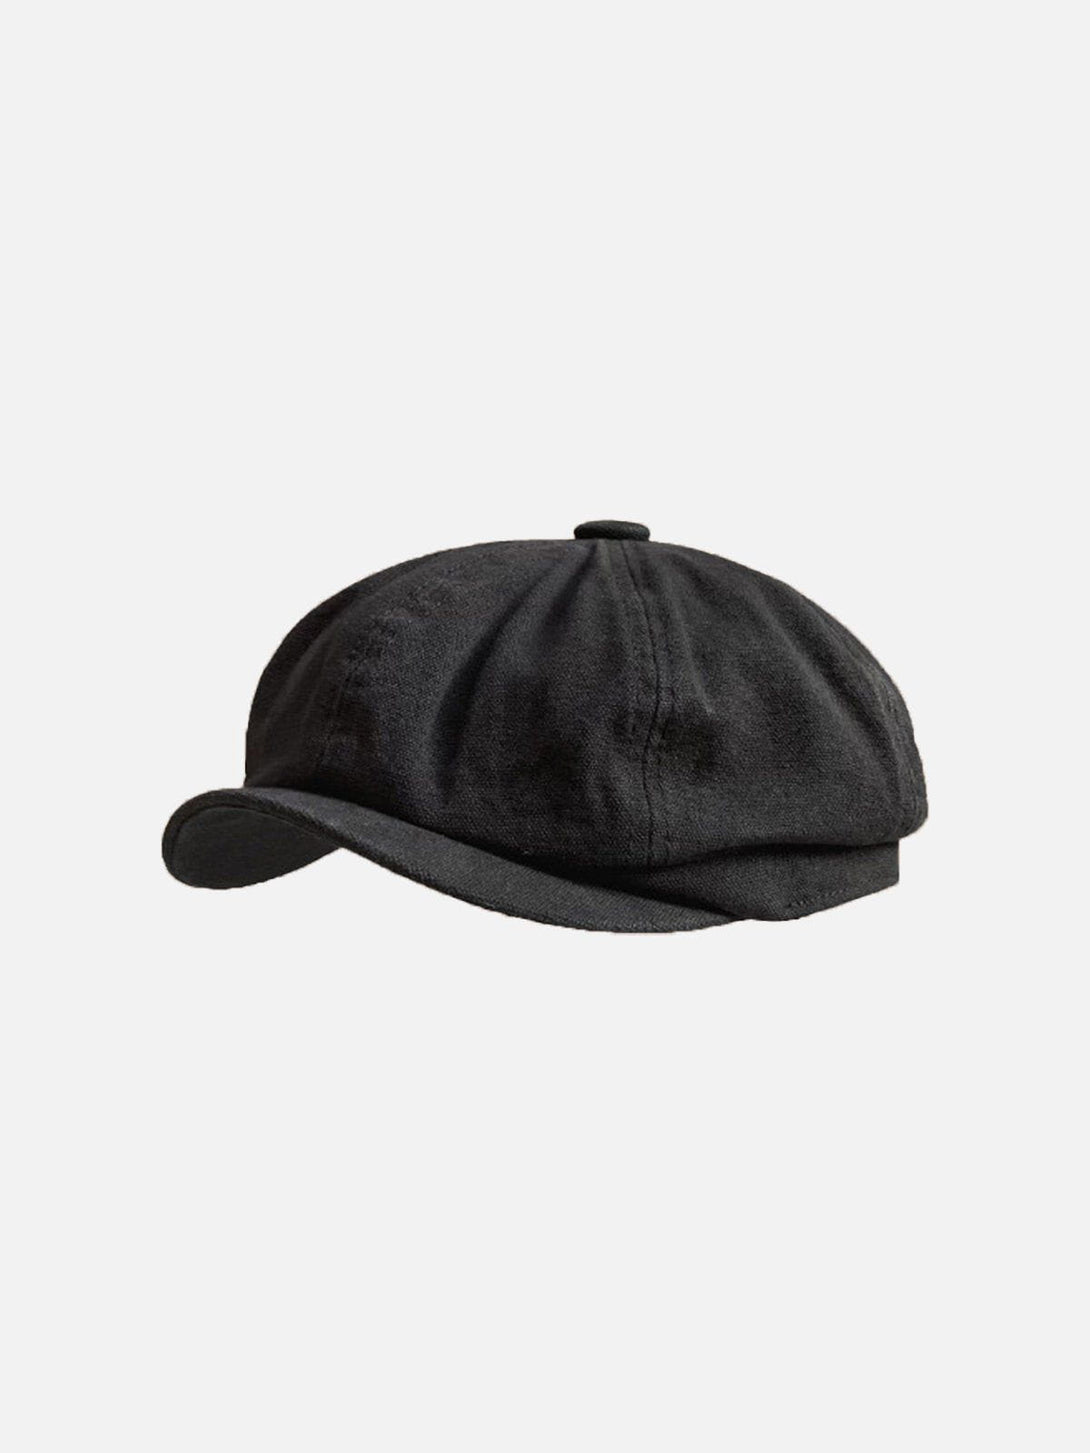 Majesda® - Vintage Solid Washed Casual Hat- Outfit Ideas - Streetwear Fashion - majesda.com